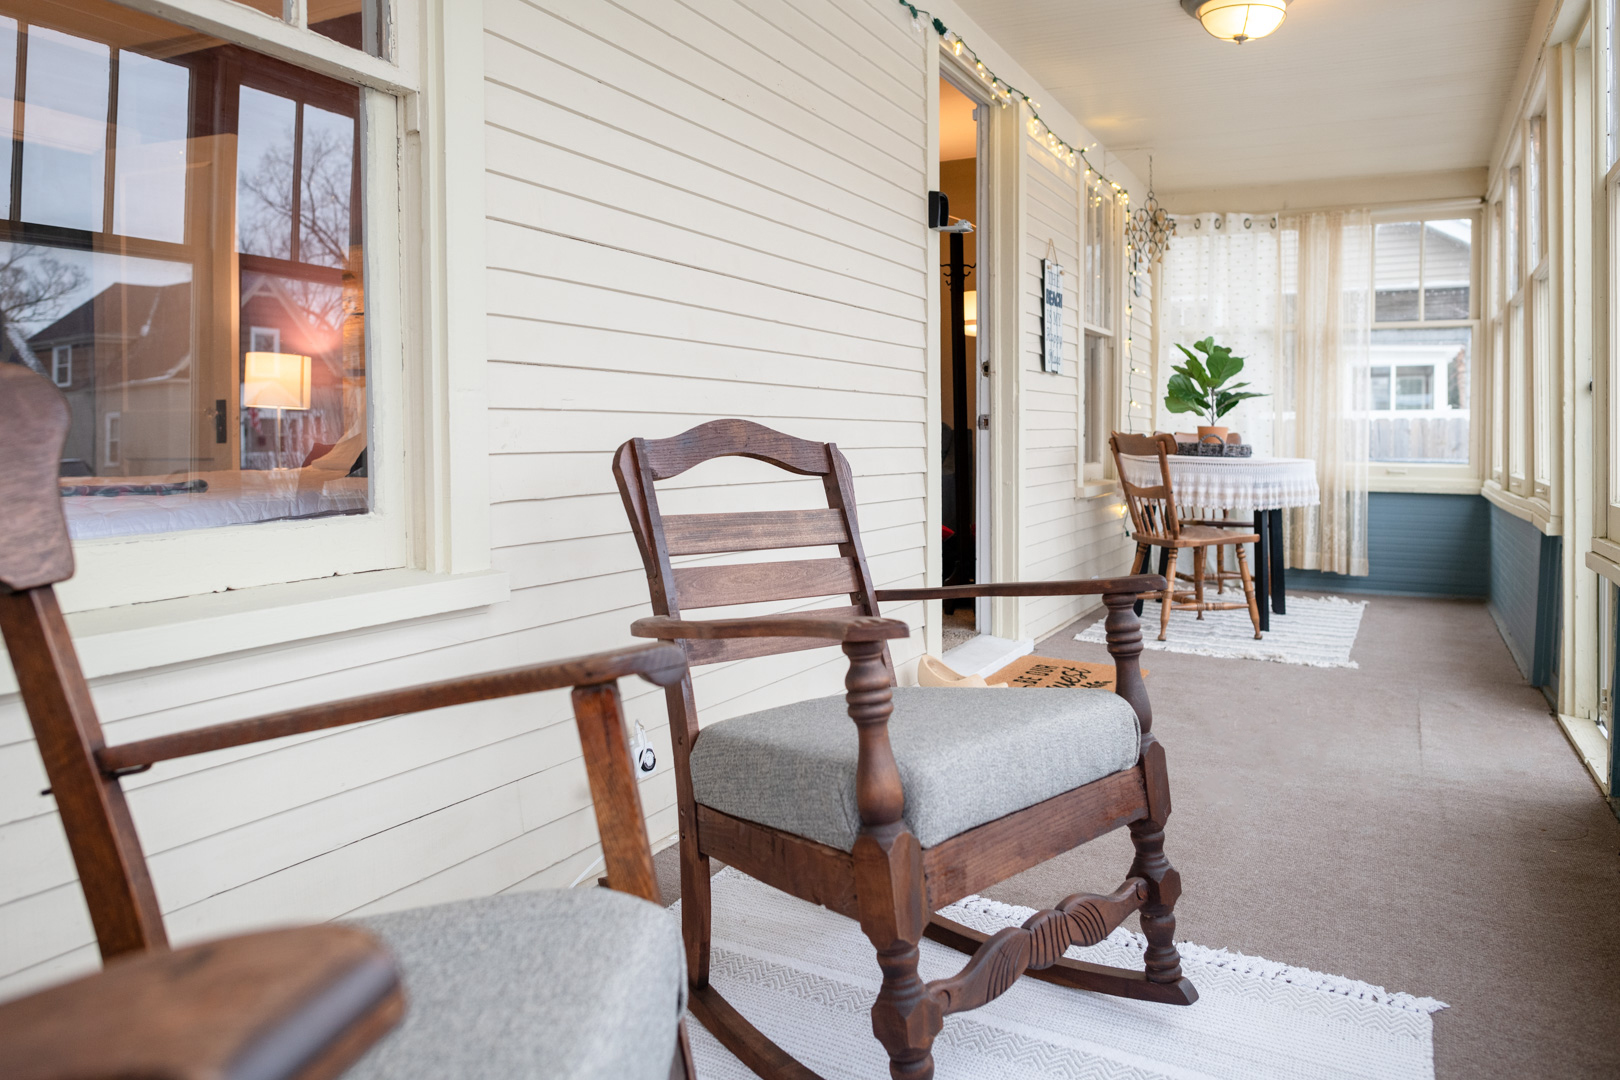 Sit on the front porch with your morning coffee and enjoy the sounds of this quiet neighborhood.